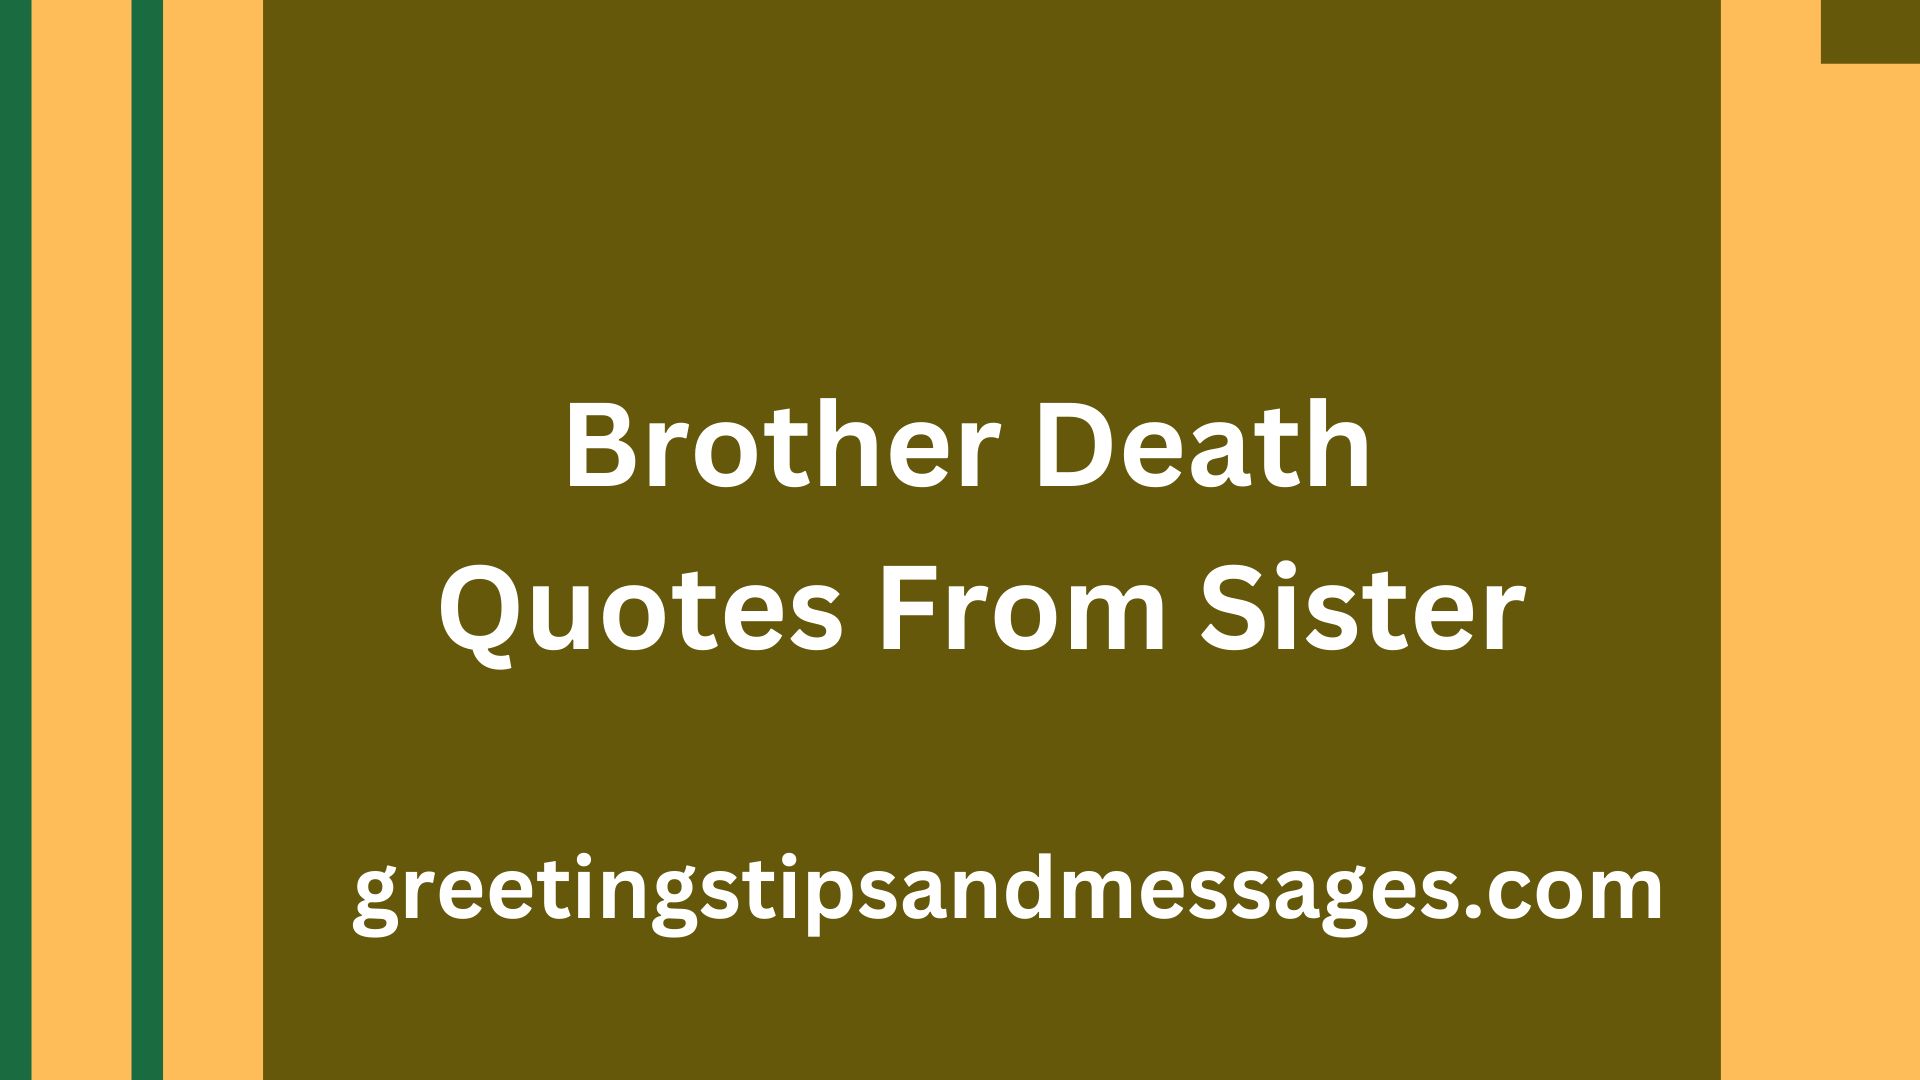 Brother Death Quotes From Sister